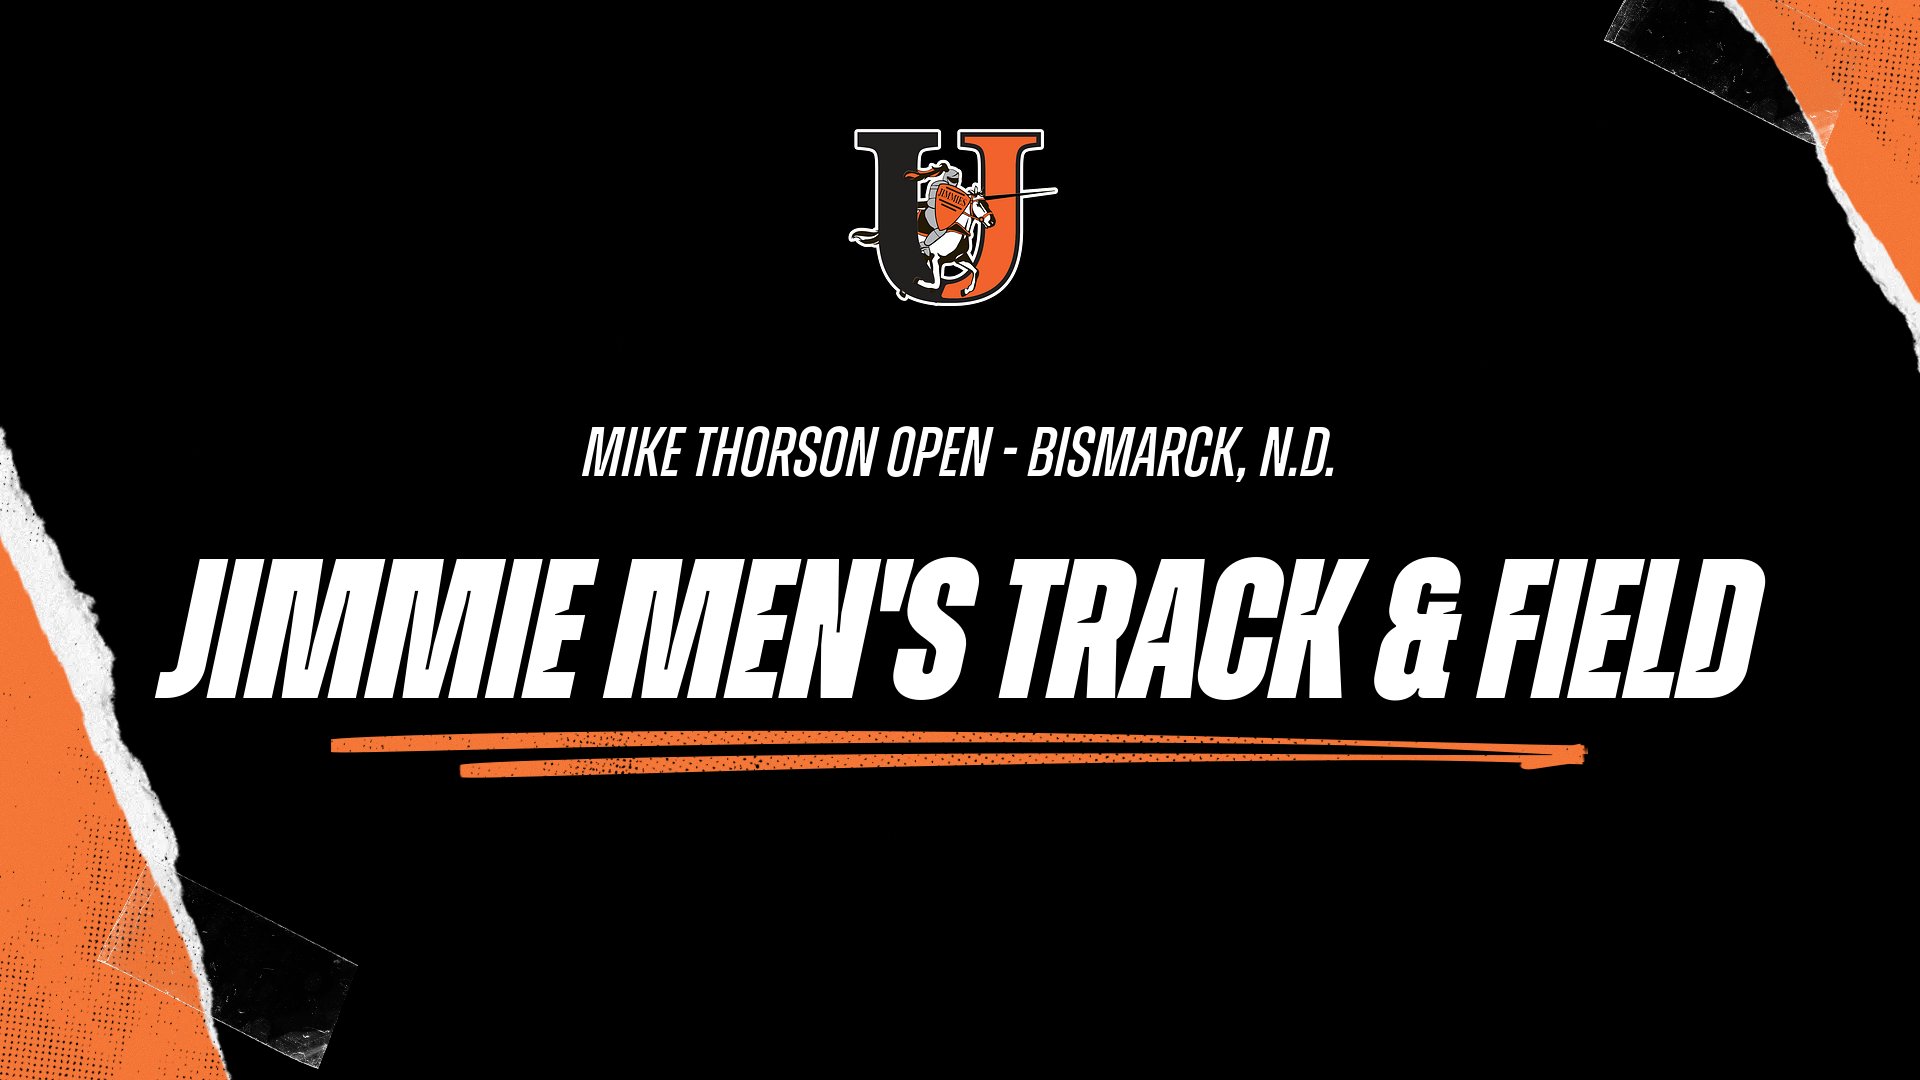 Men's track & field compete Saturday at Mike Thorson Open